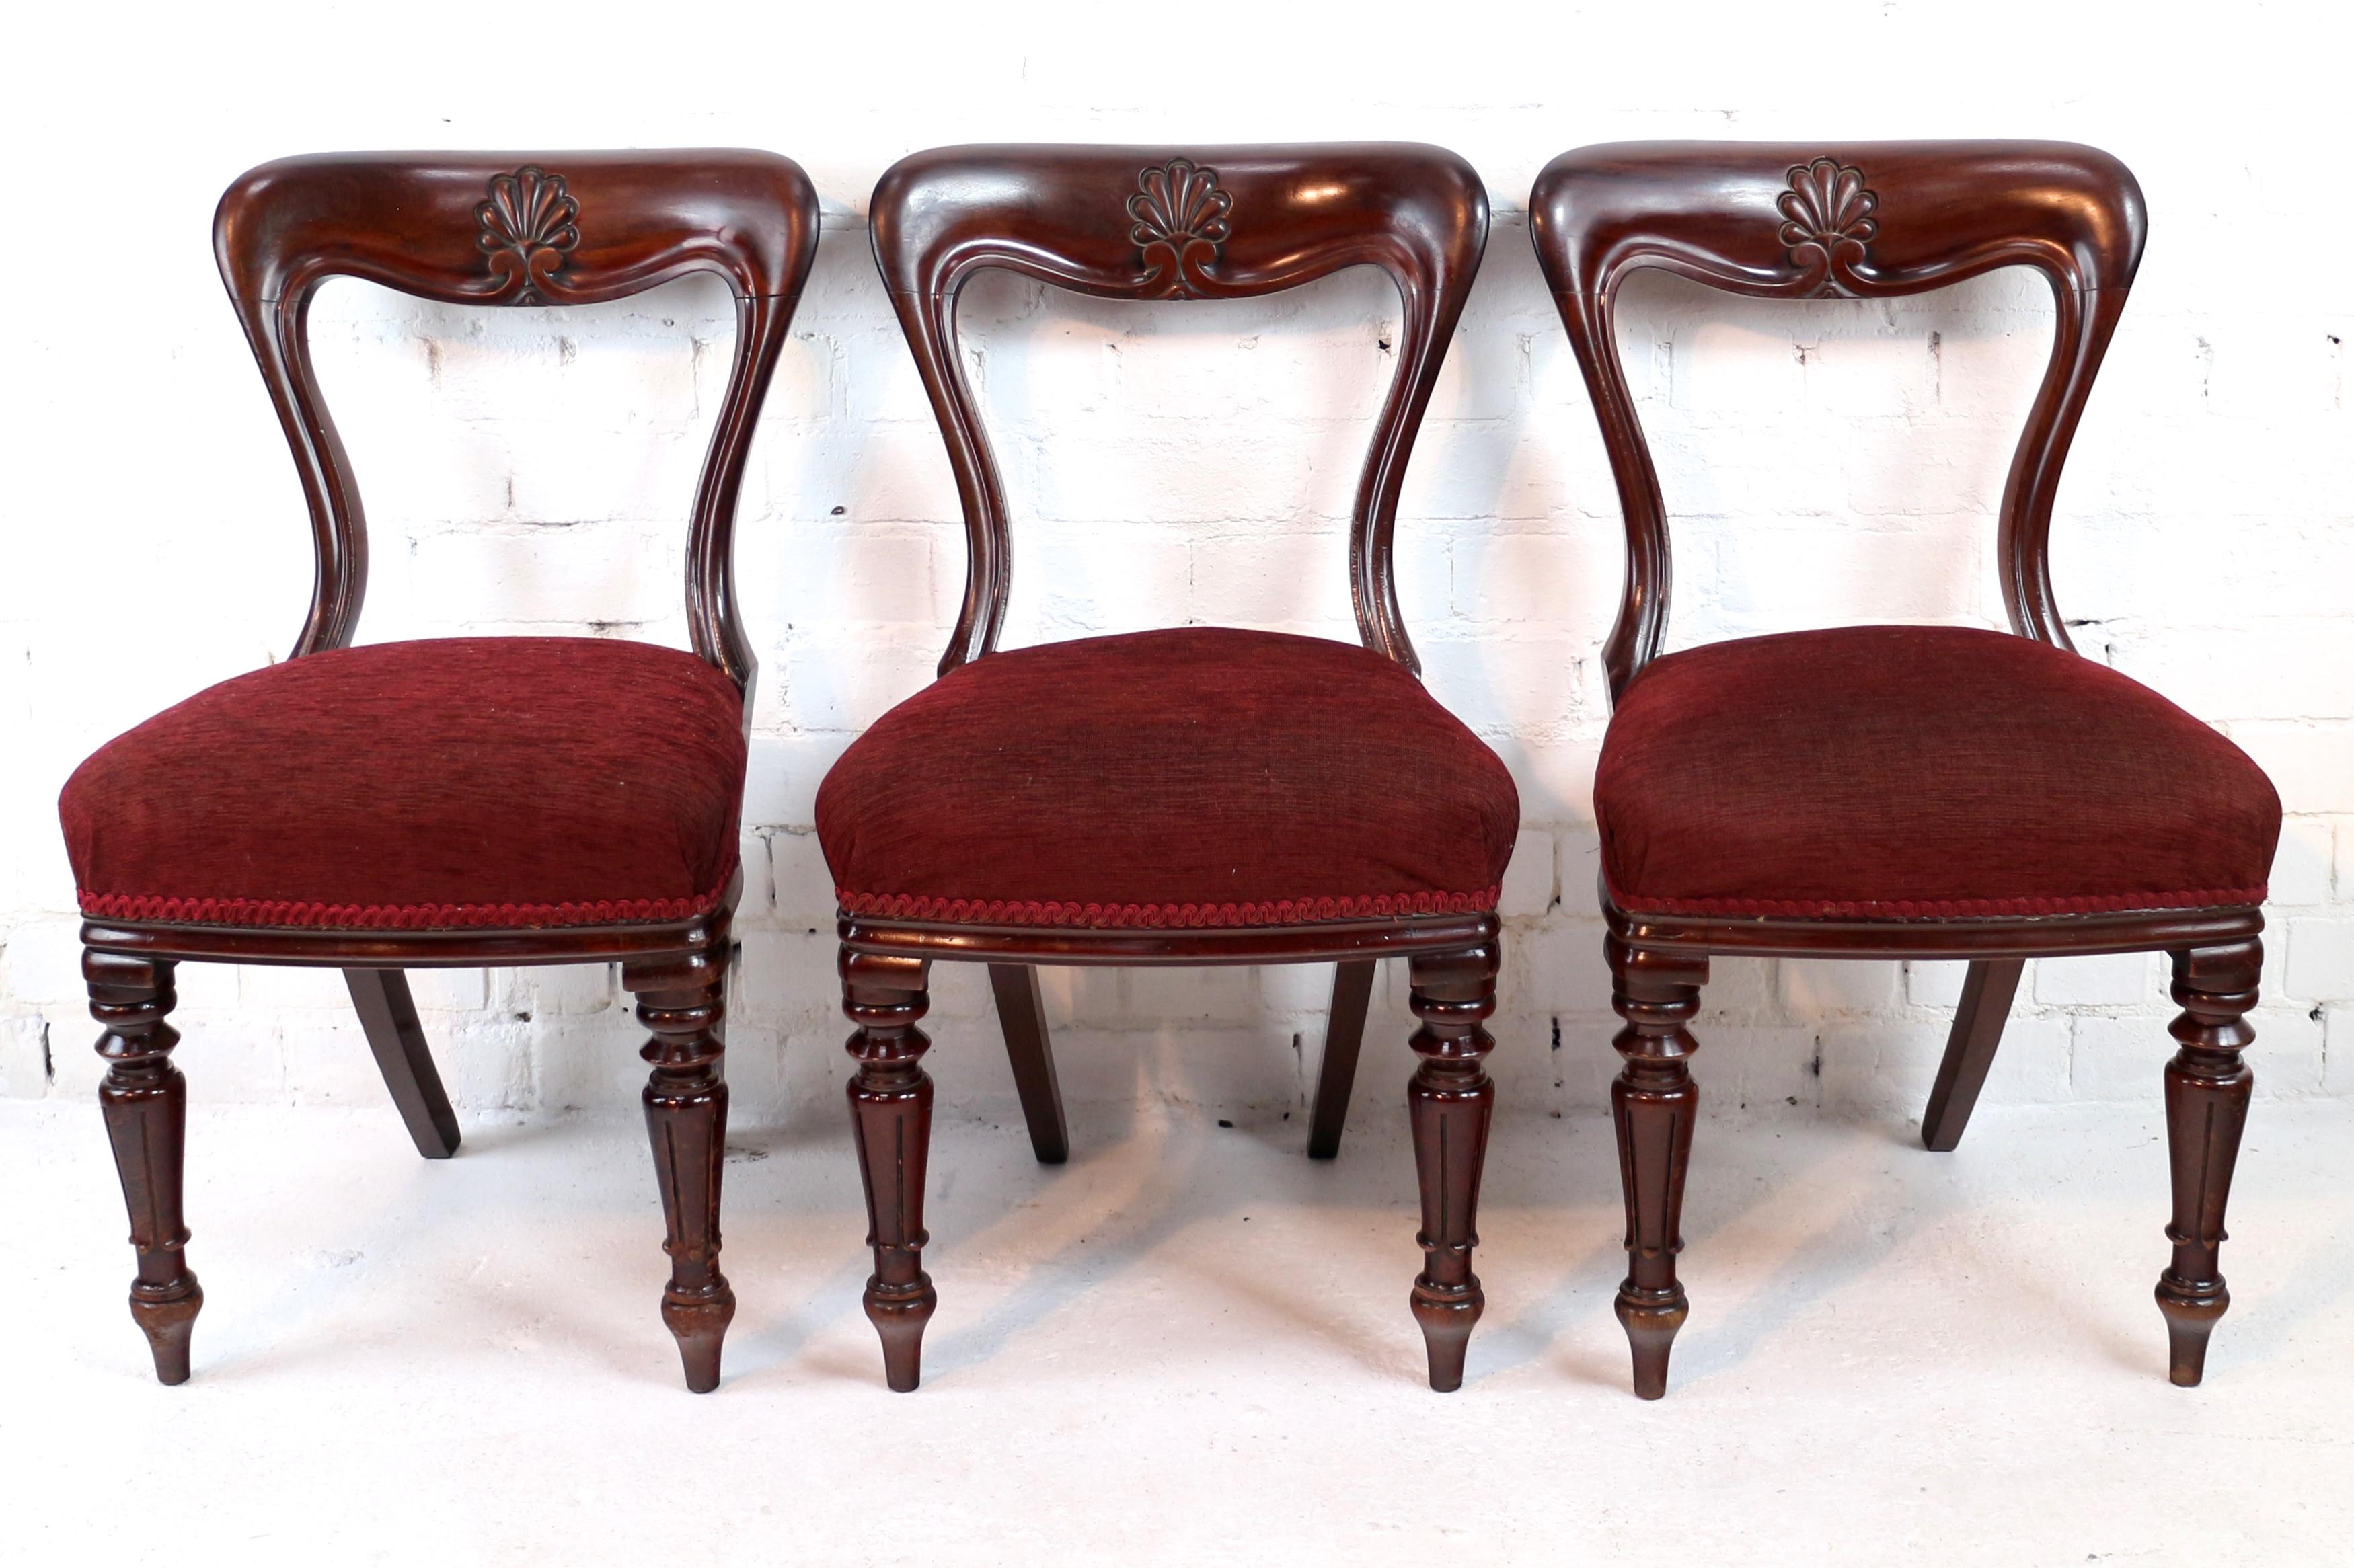 Set of 10 Antique English William IV Mahogany Dining Chairs by J Proctor For Sale 7